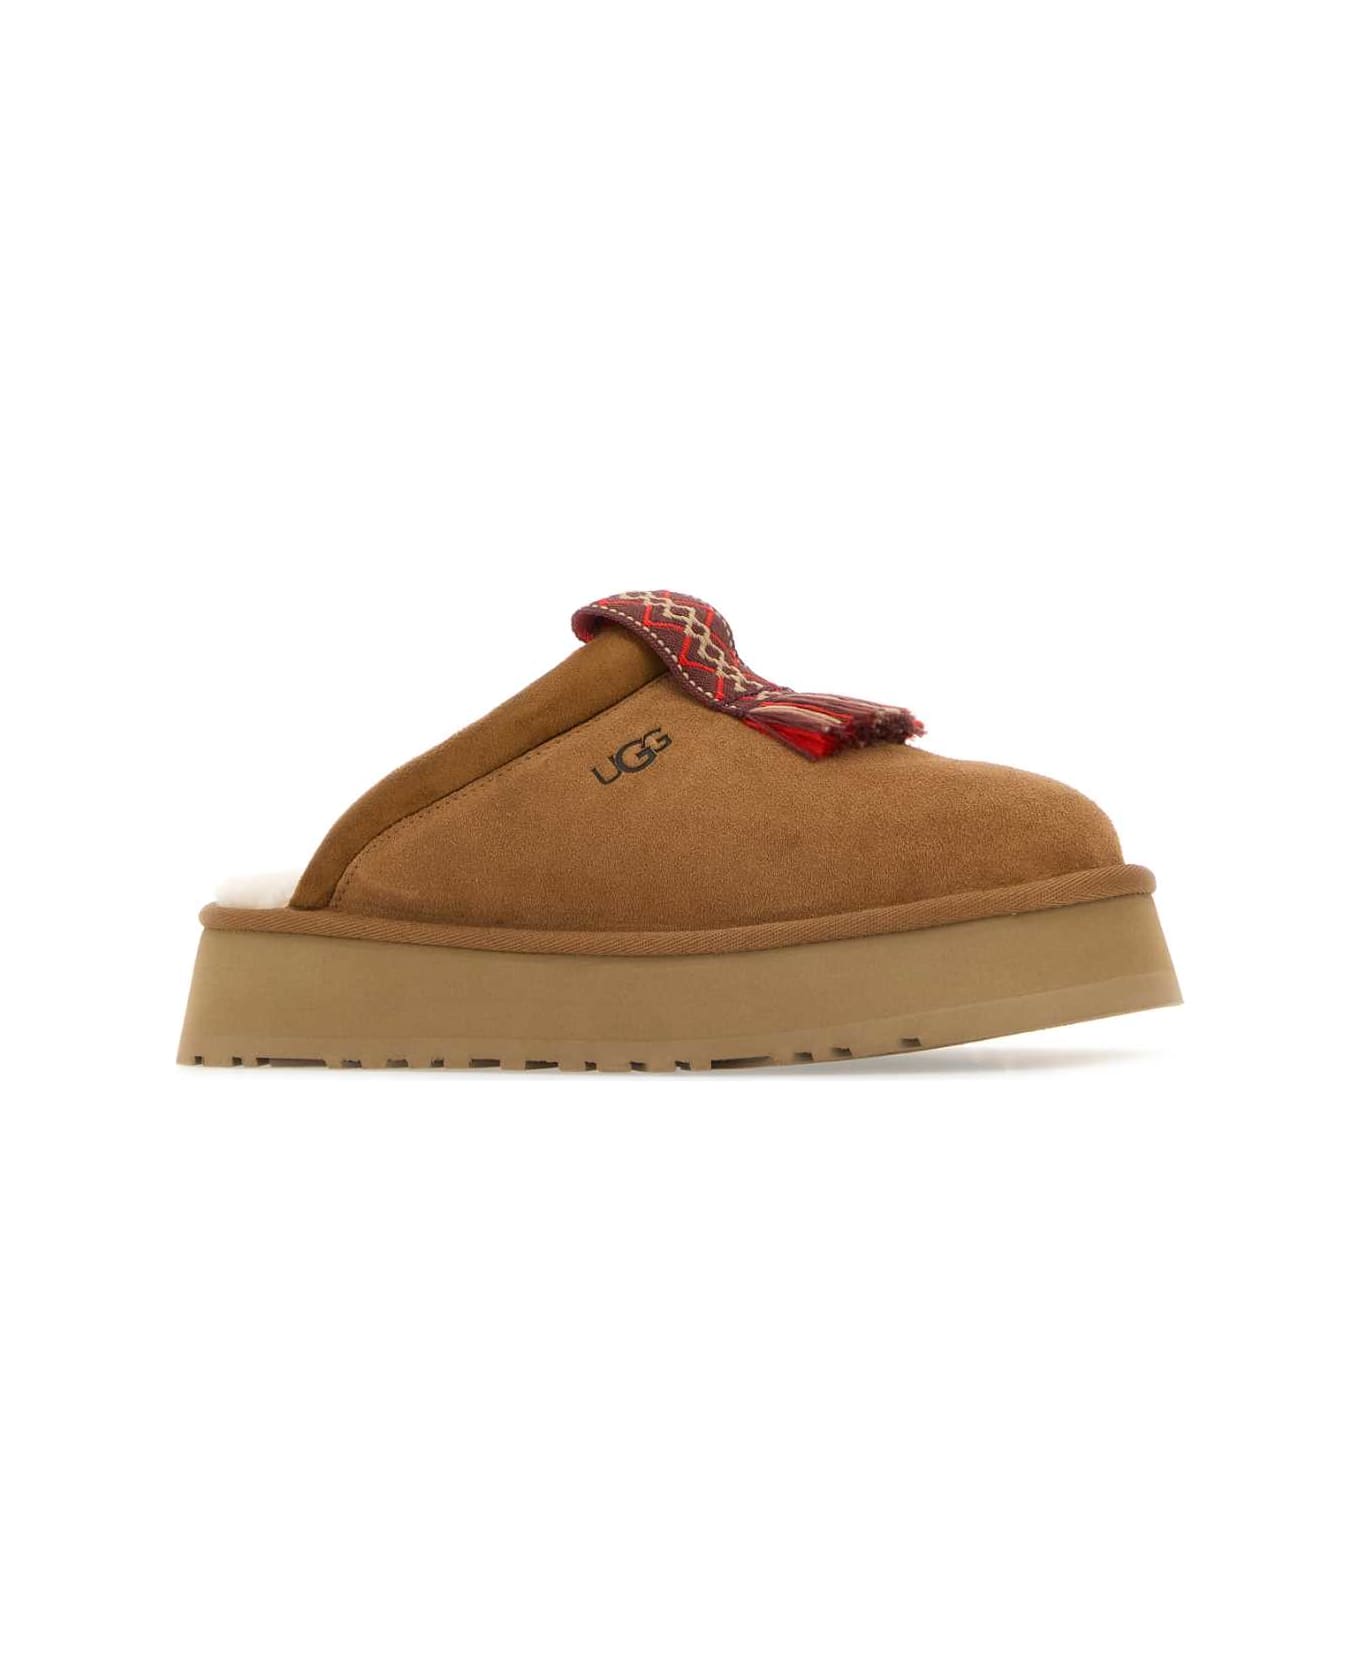 UGG Camel Suede Tazzle Slippers - CHESTNUT